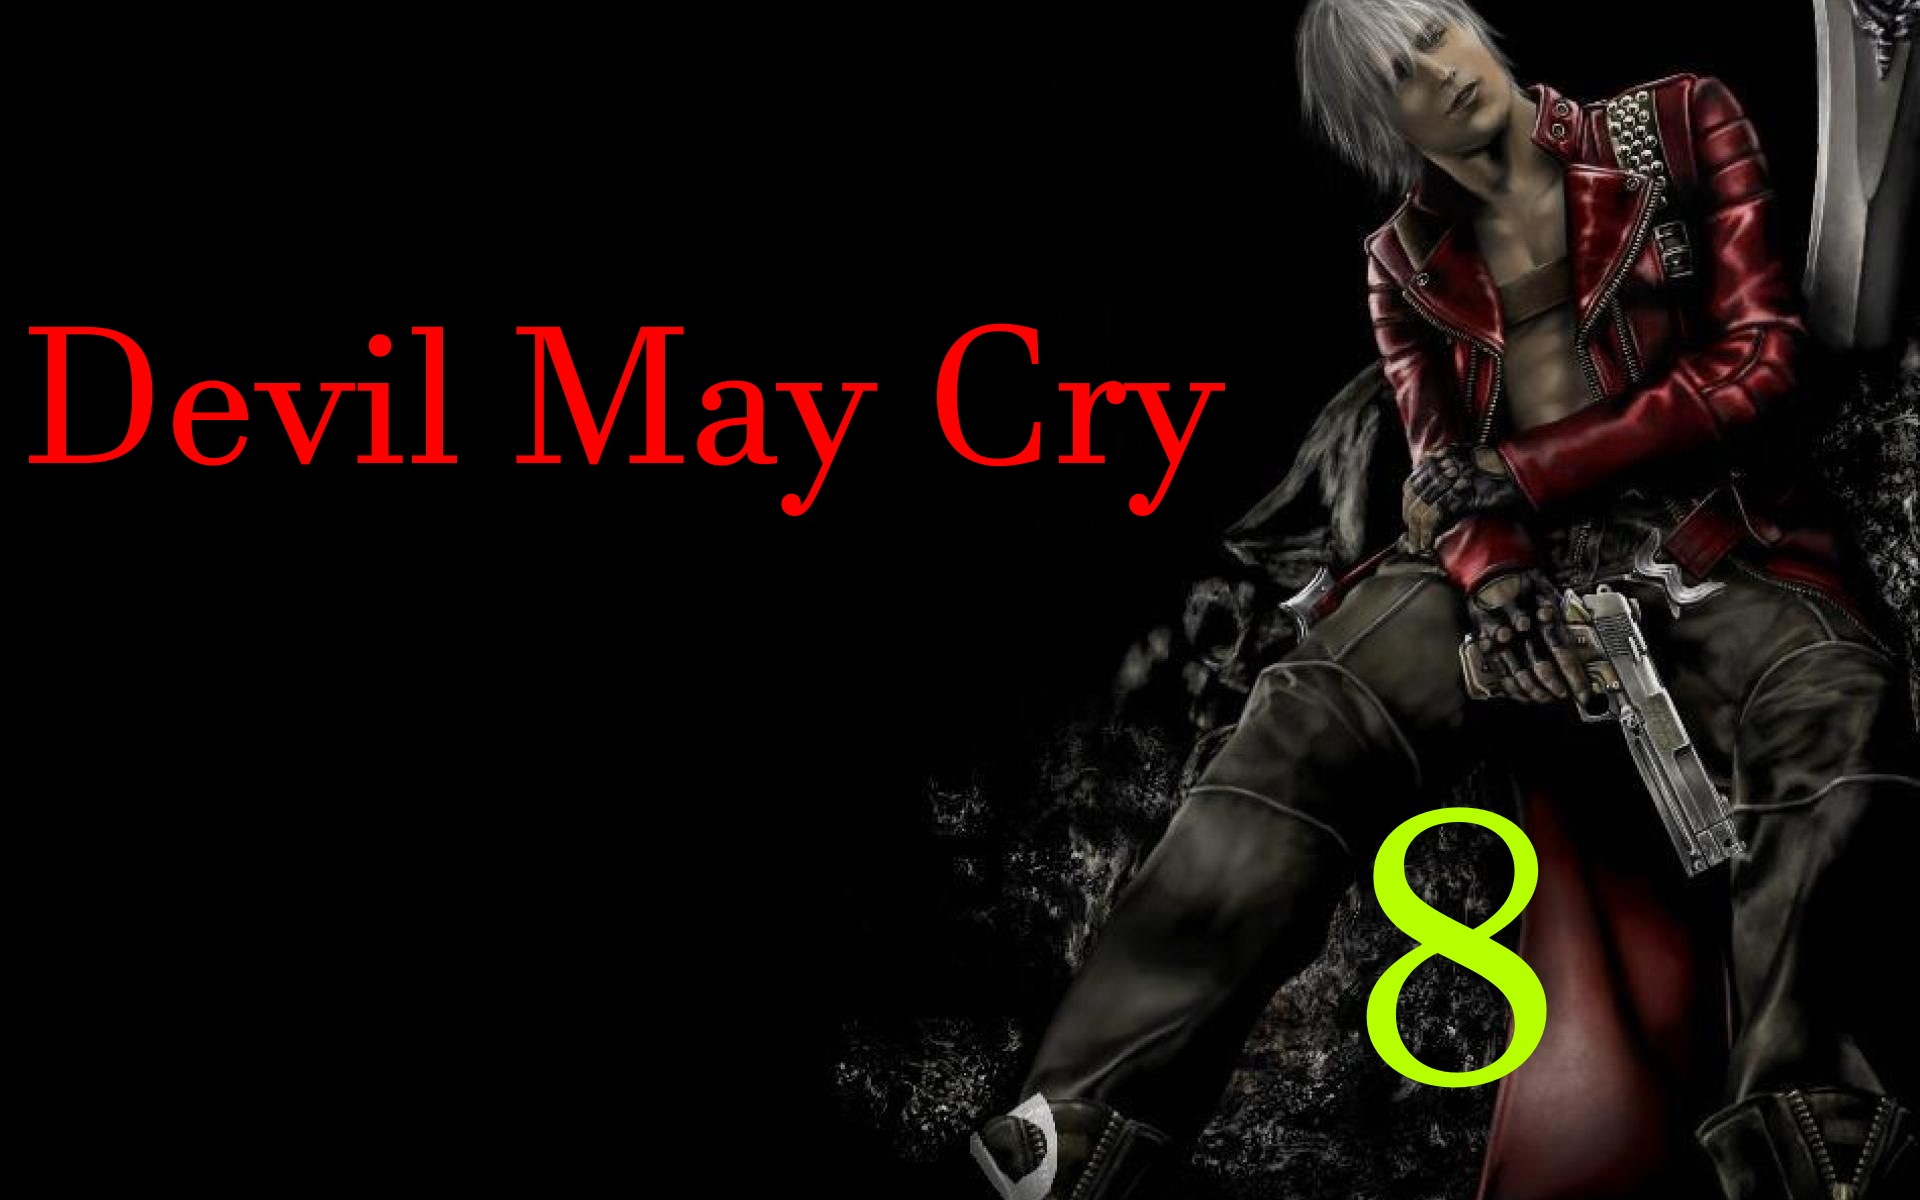 Devil may cry 3 can find steam фото 24